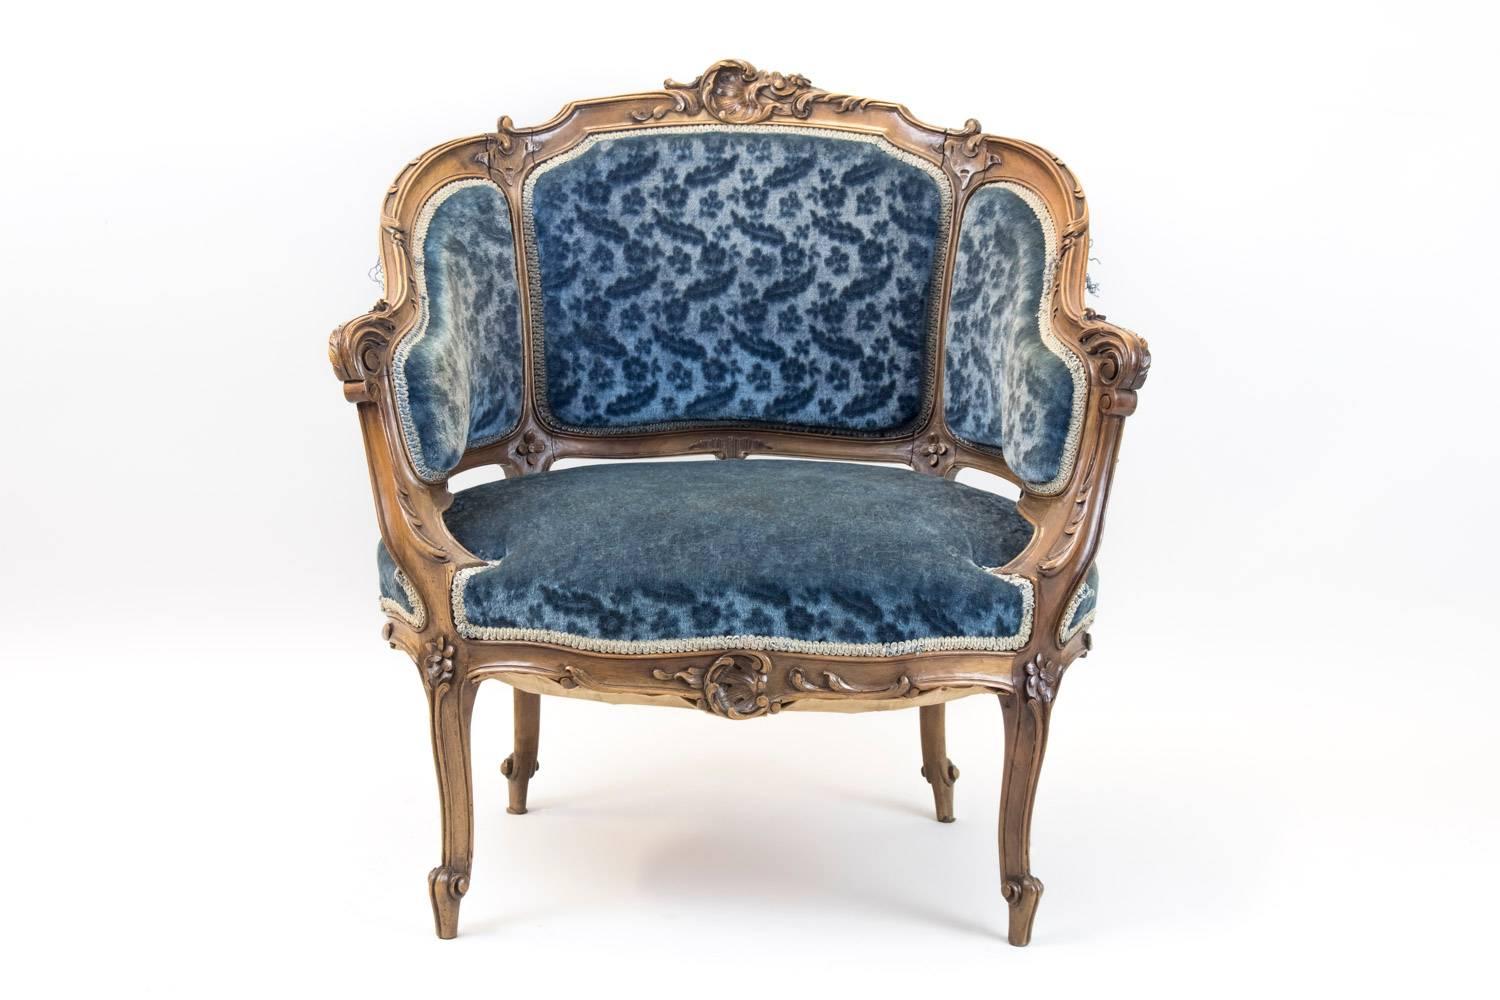 Pair of Rocaille style corbeille-shaped bergere armchairs in carved walnut, standing on four curved legs. Chantournés uprights and apron. Decoration of acanthus leaves on the armrests and of shells, flowers and plants on the apron, uprights and